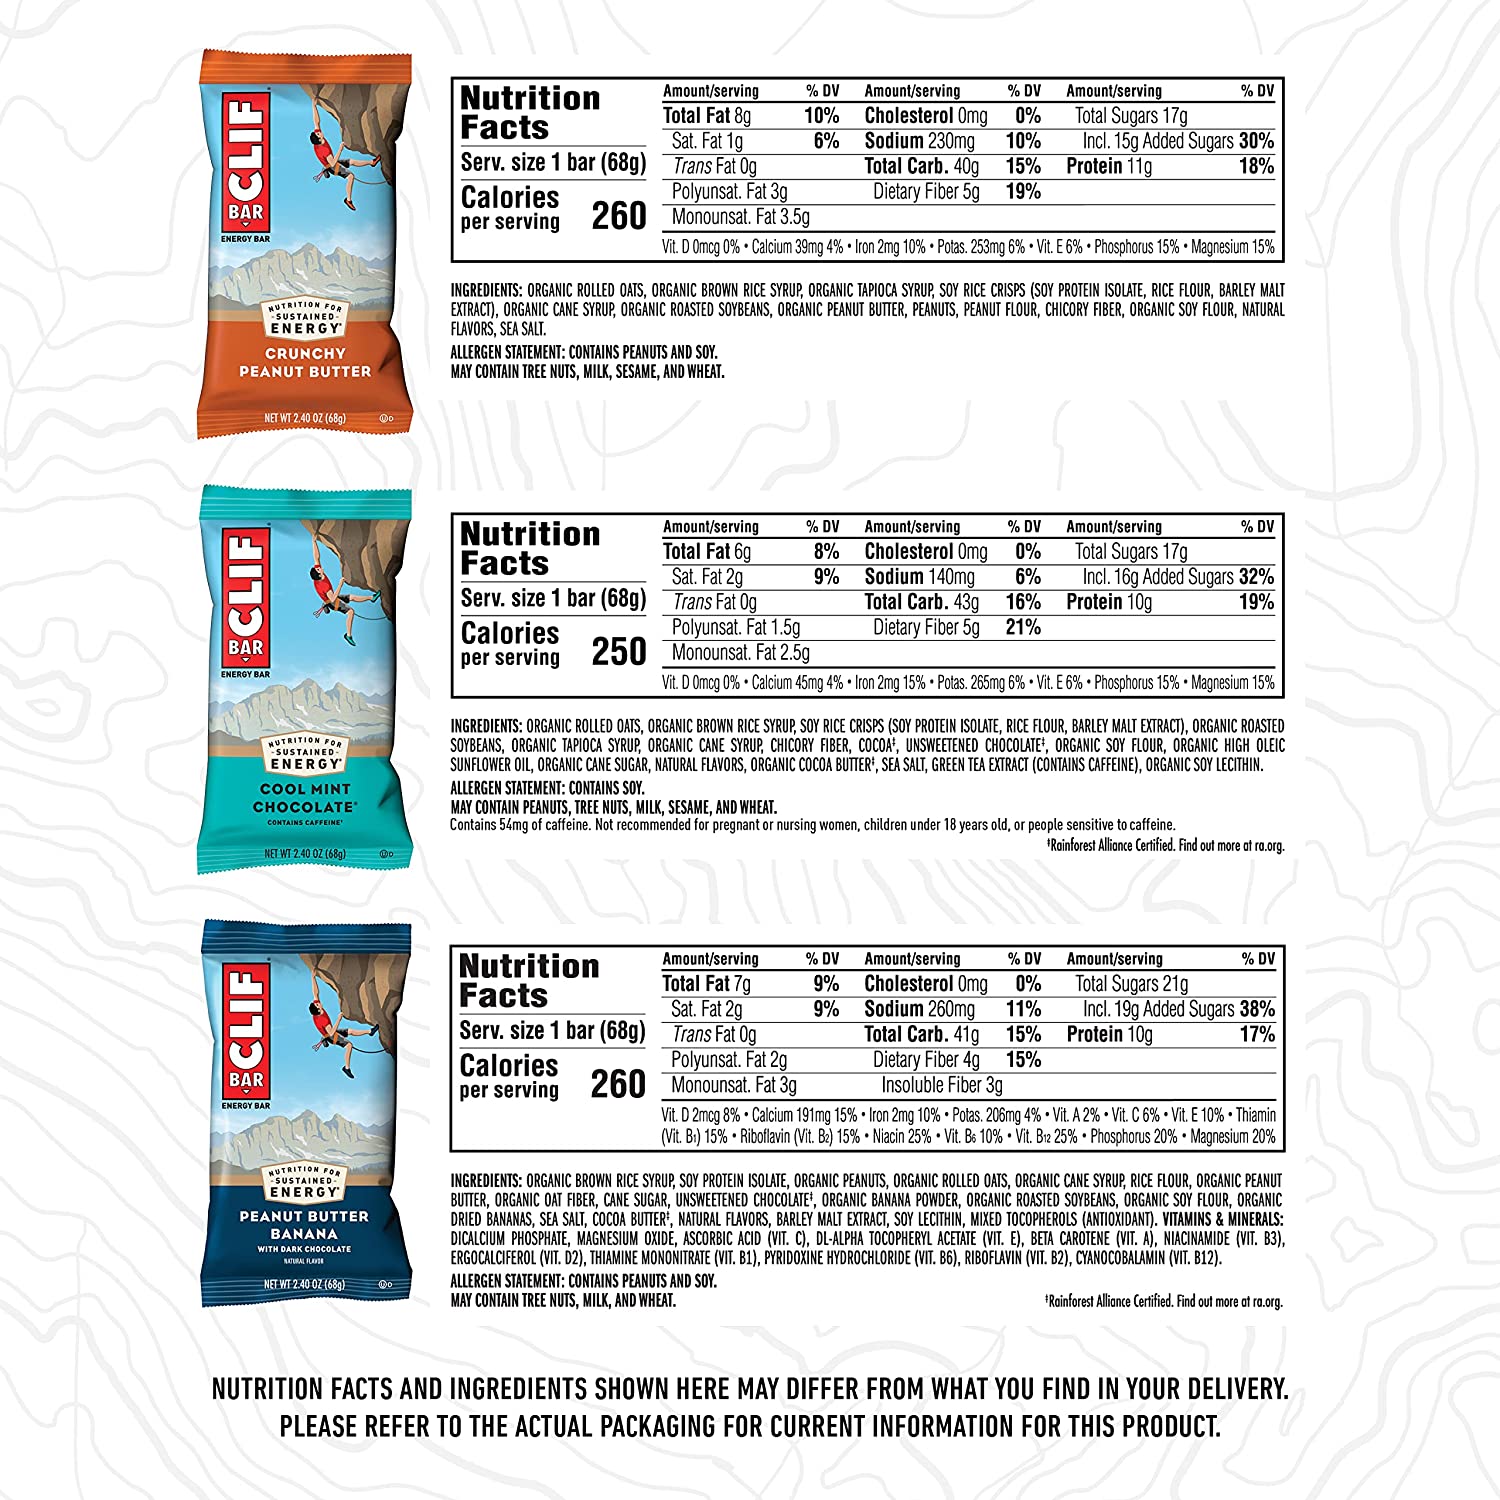 Clif Bars Reviews, Info & Best Sellers (Over 20 Flavors!)